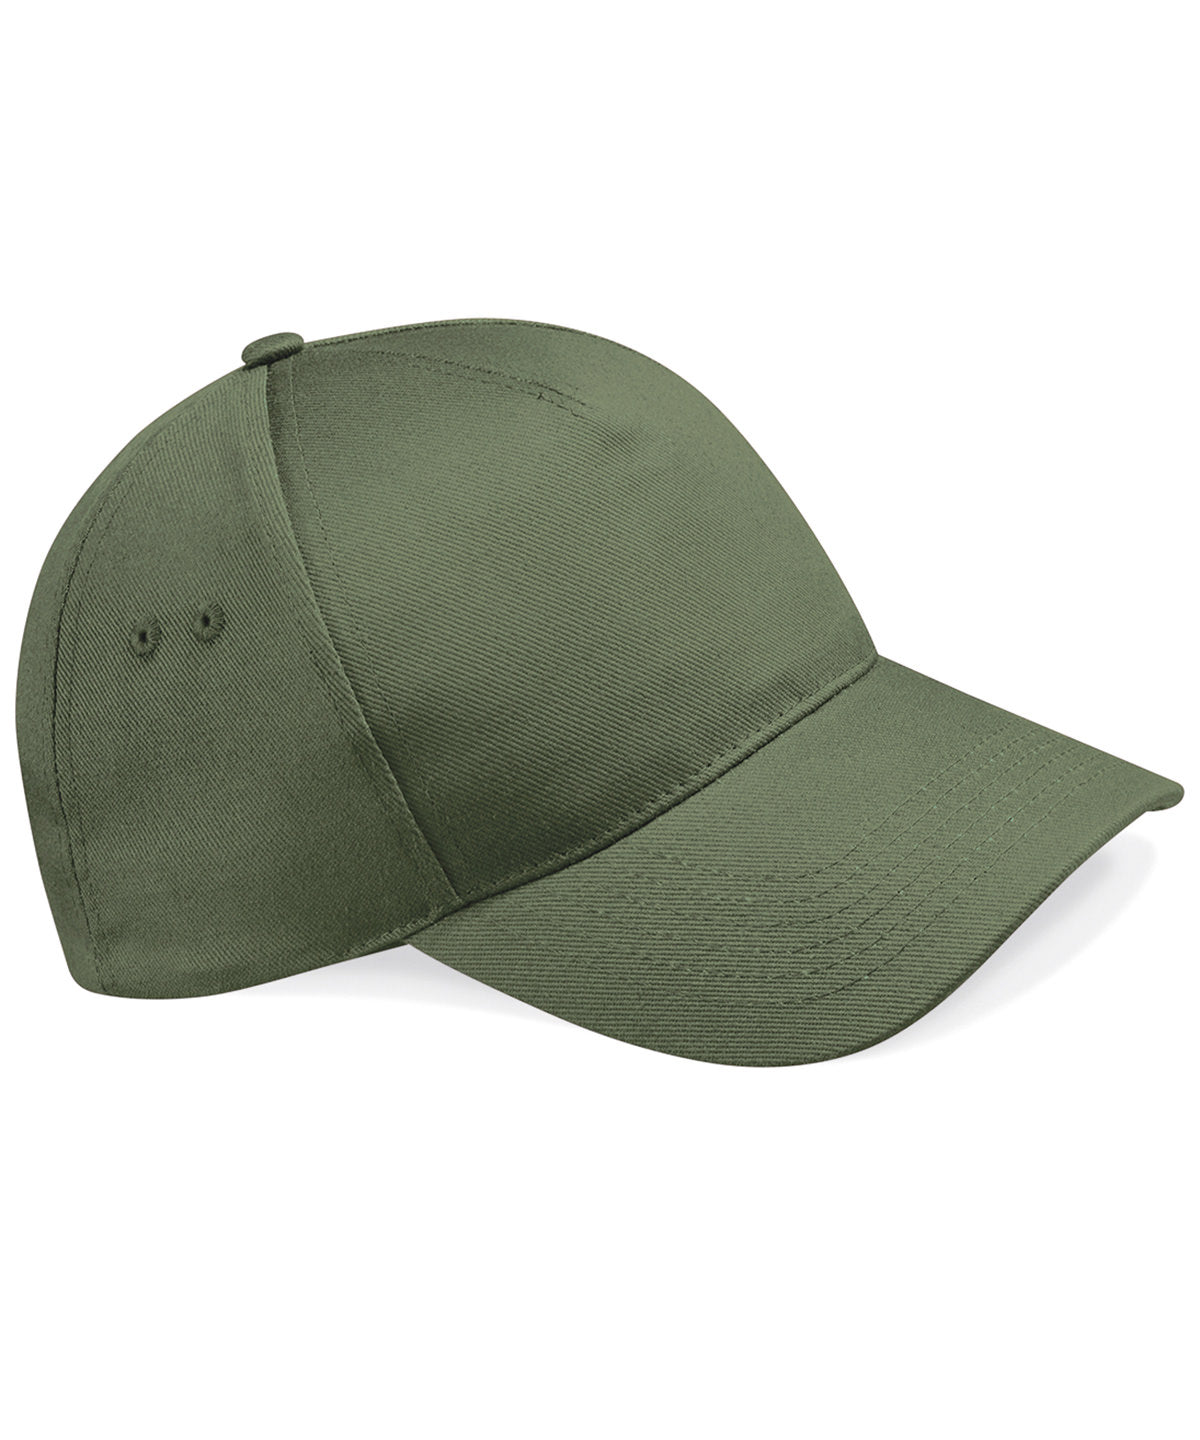 Personalised Caps - Olive Beechfield Ultimate 5-panel cap